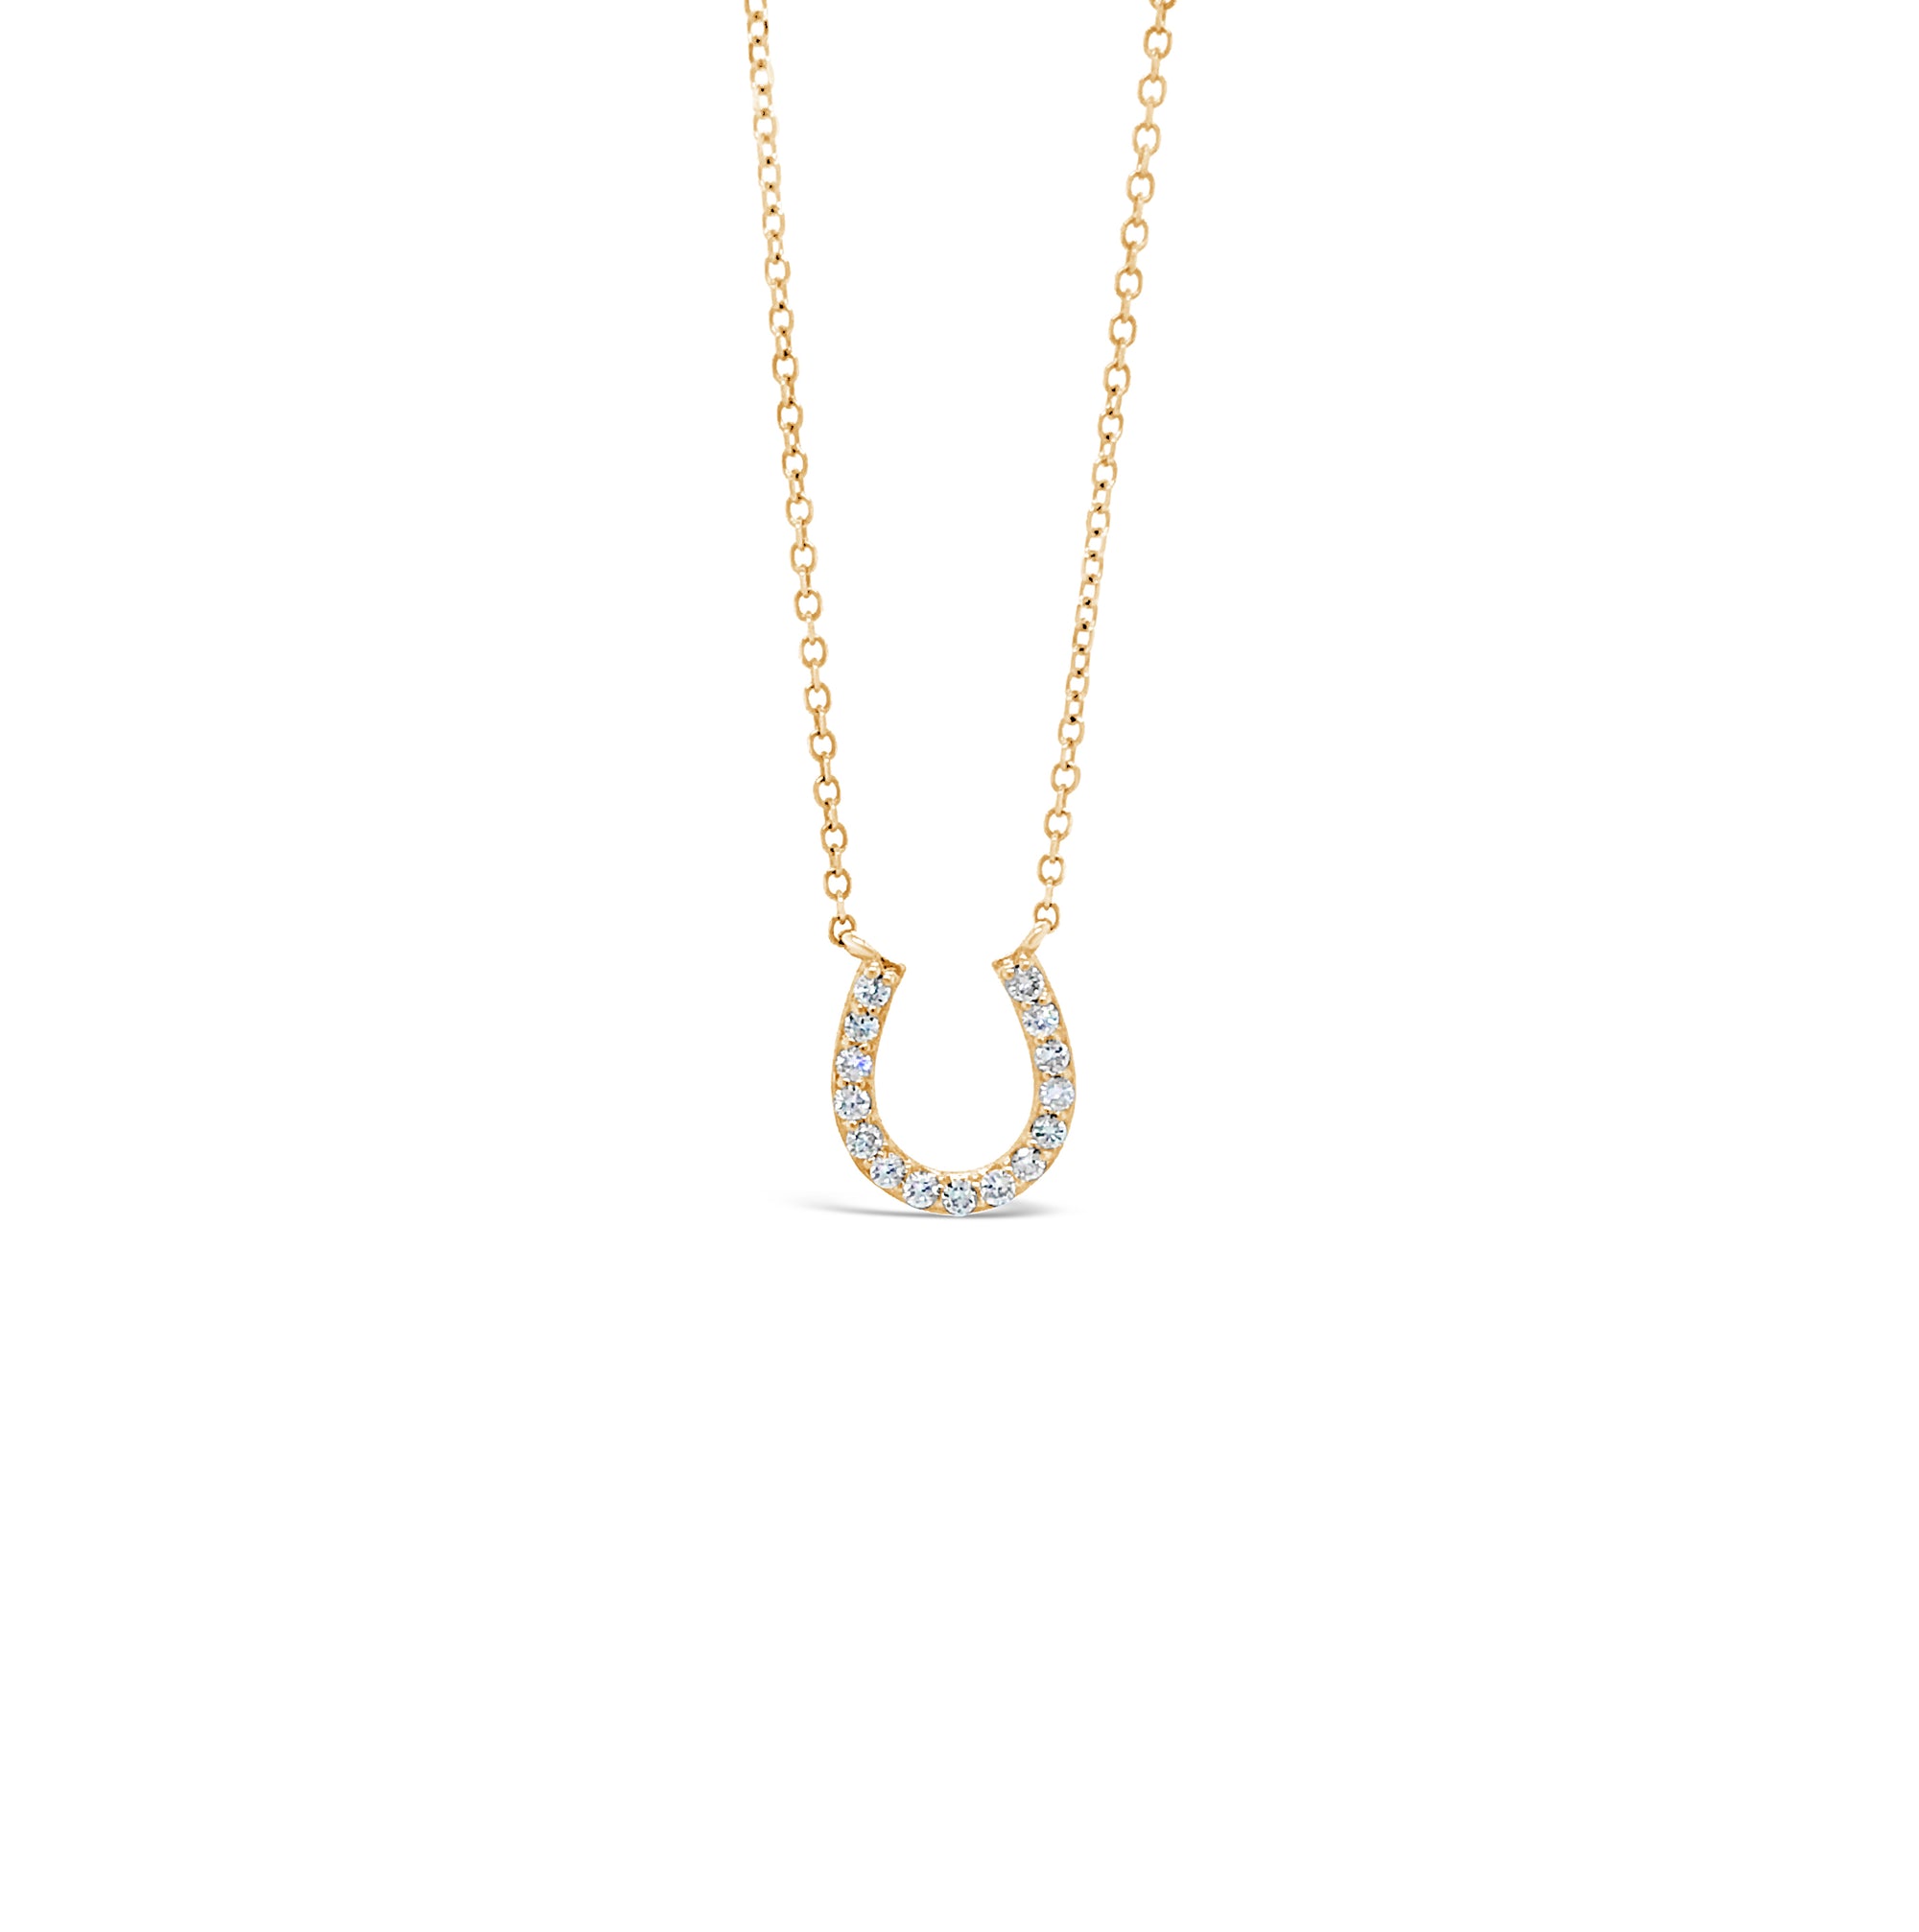 Diamond Horseshoe Pendant Necklace  -14K yellow gold weighing 1.8 grams  -15 round diamonds totaling 0.15 carats   -adjustable 16"-18" chain